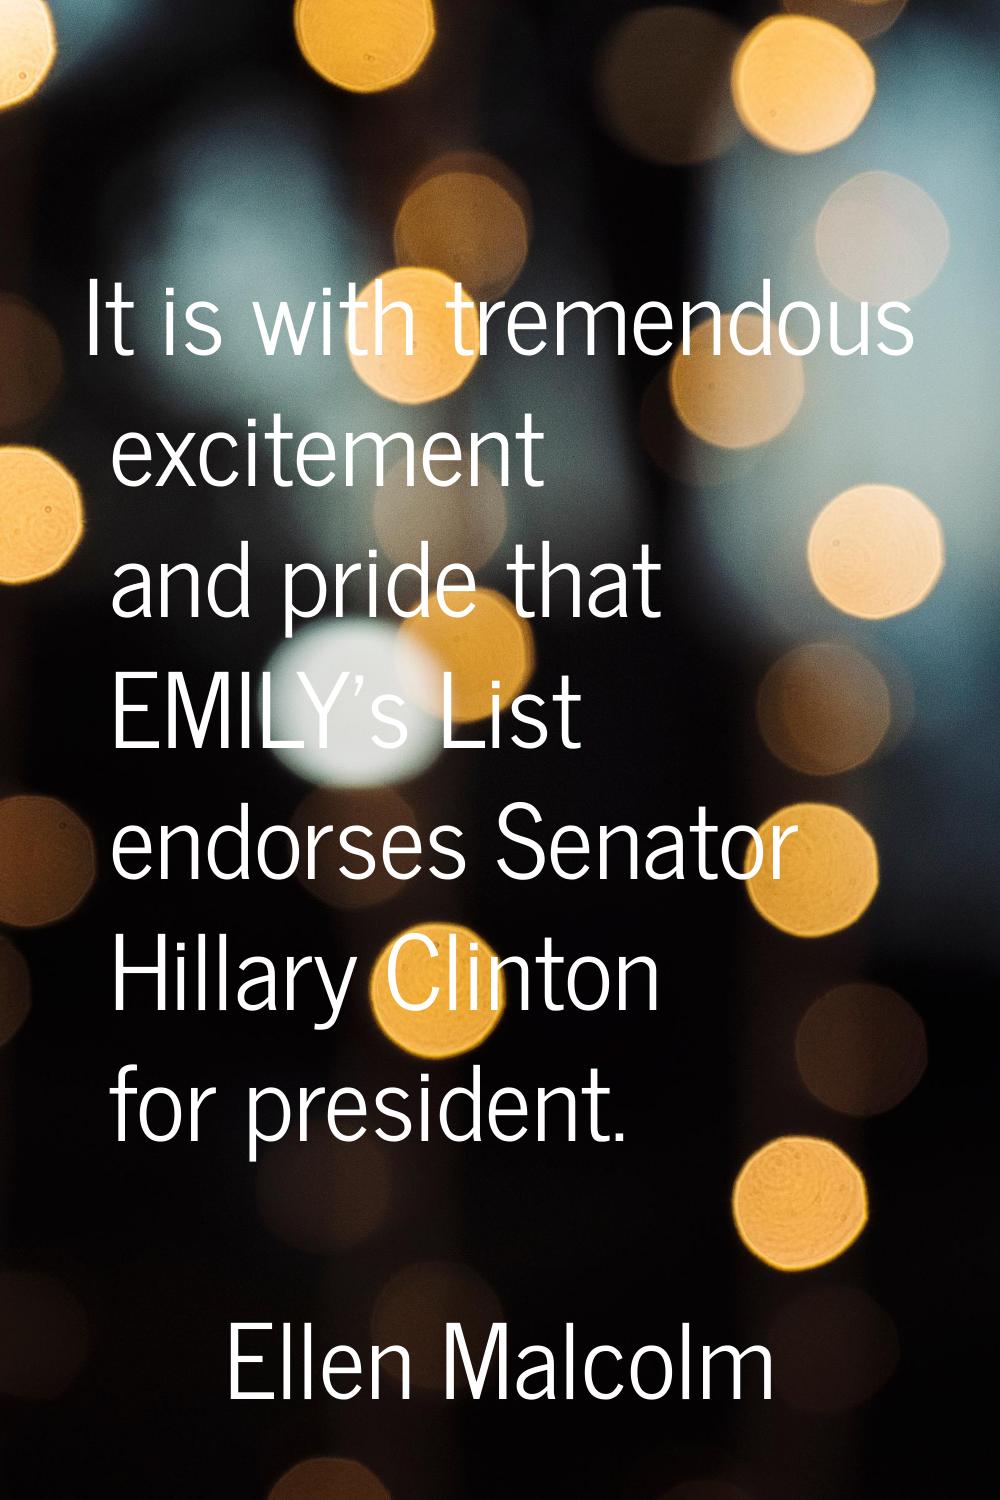 It is with tremendous excitement and pride that EMILY's List endorses Senator Hillary Clinton for p